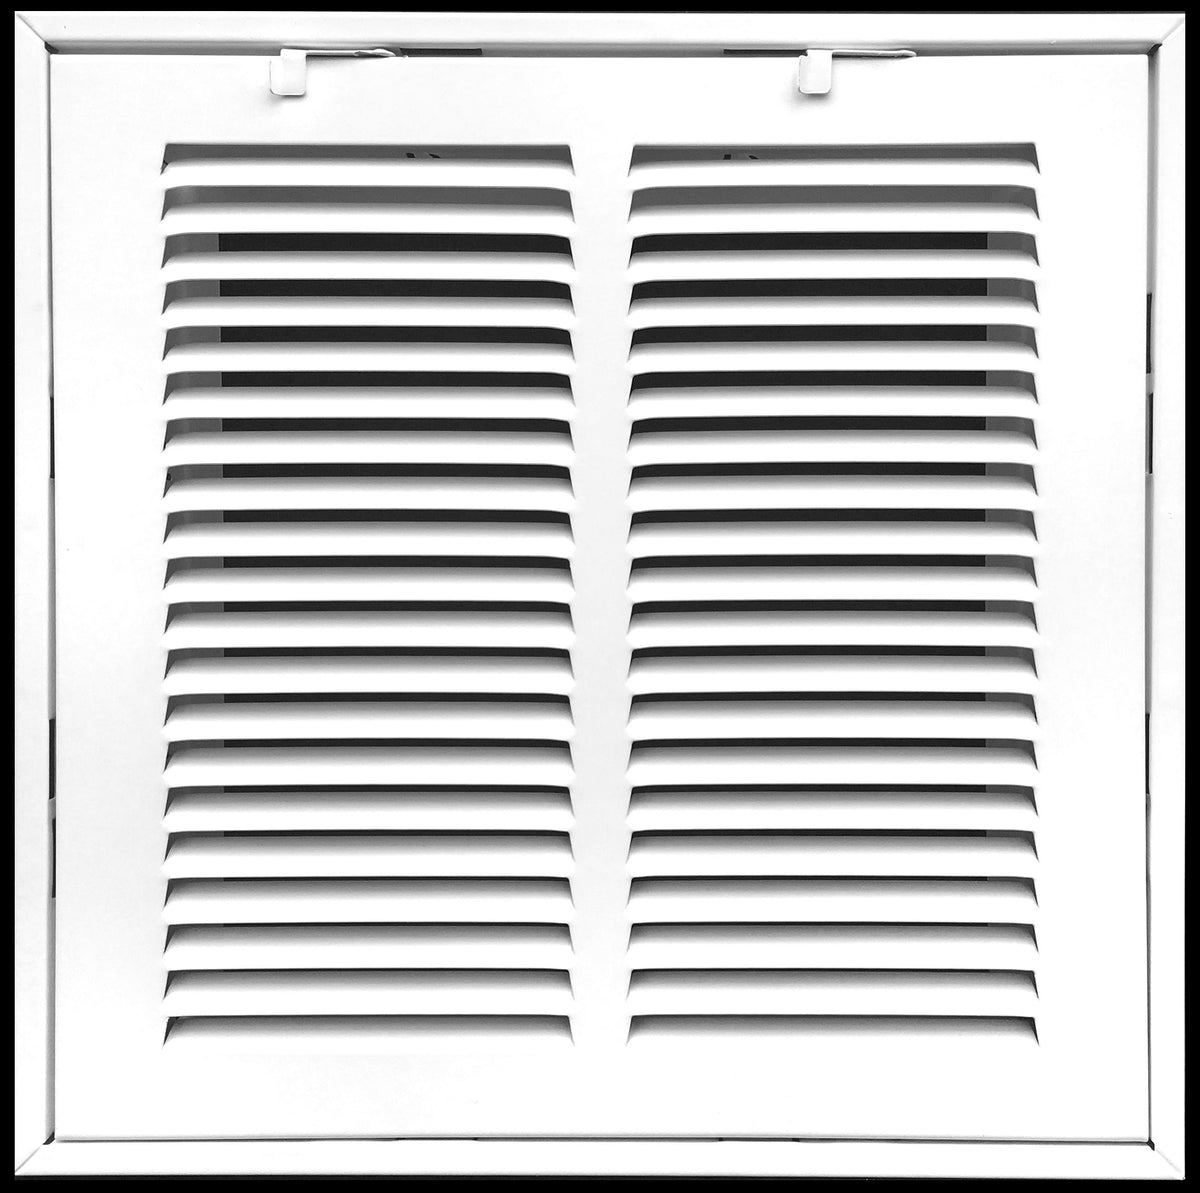 12&quot; X 12&quot; Steel Return Air Filter Grille for 1&quot; Filter - Removable Frame - [Outer Dimensions: 14 5/8&quot; X 14 5/8&quot;]